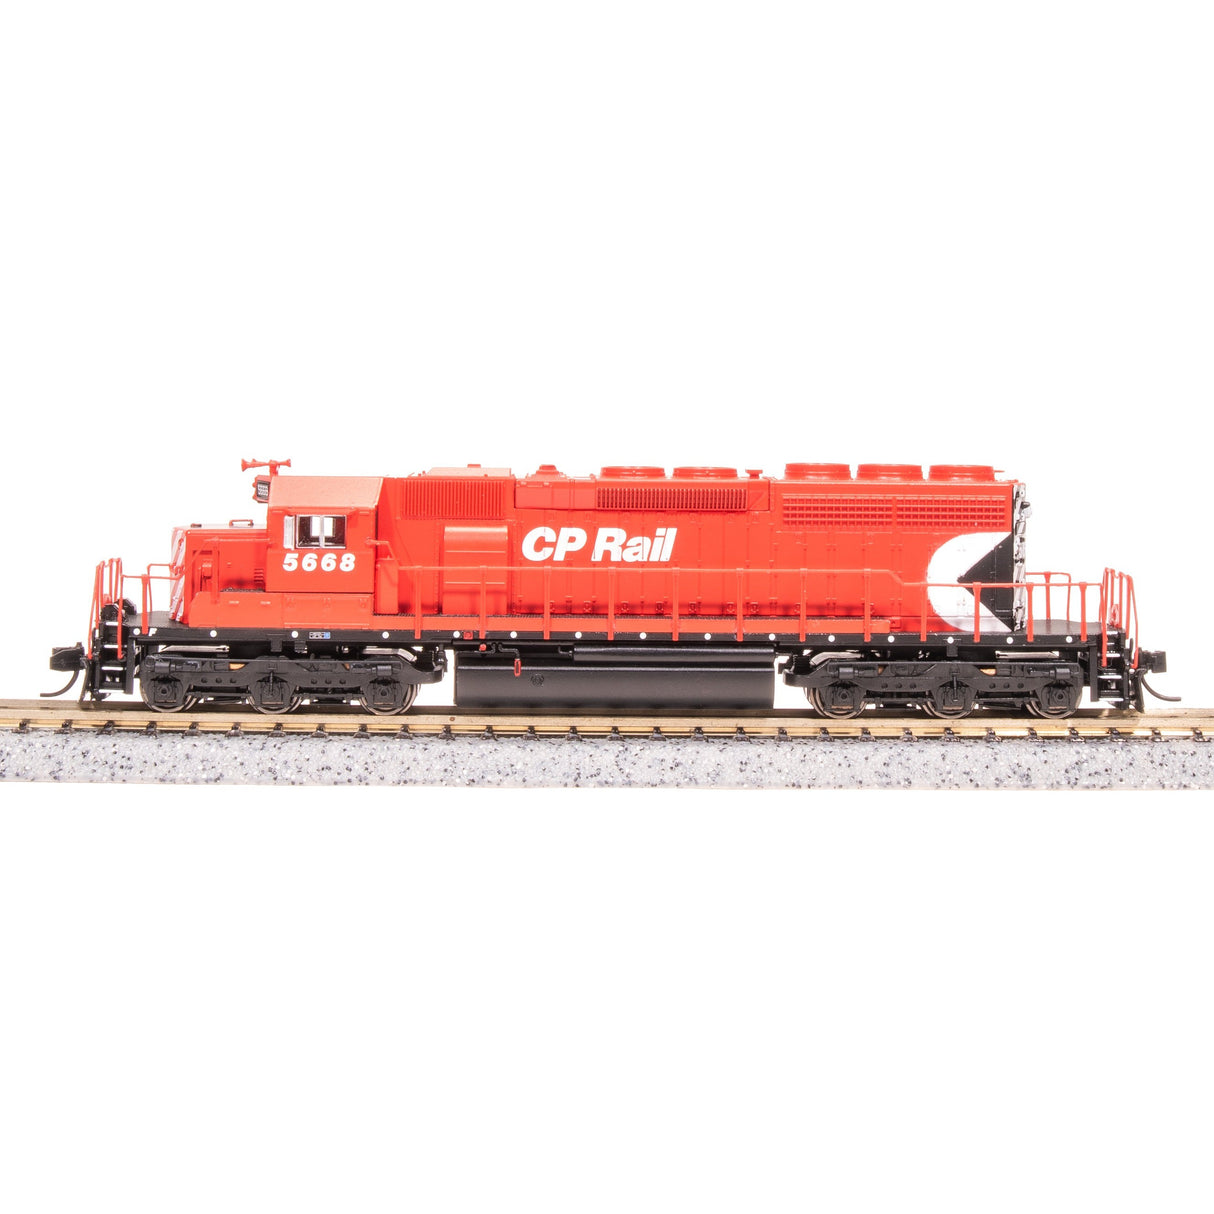 Broadway Limited N Scale SD40-2 Diesel CP Rail #5668/Multimark DC/DCC Sound